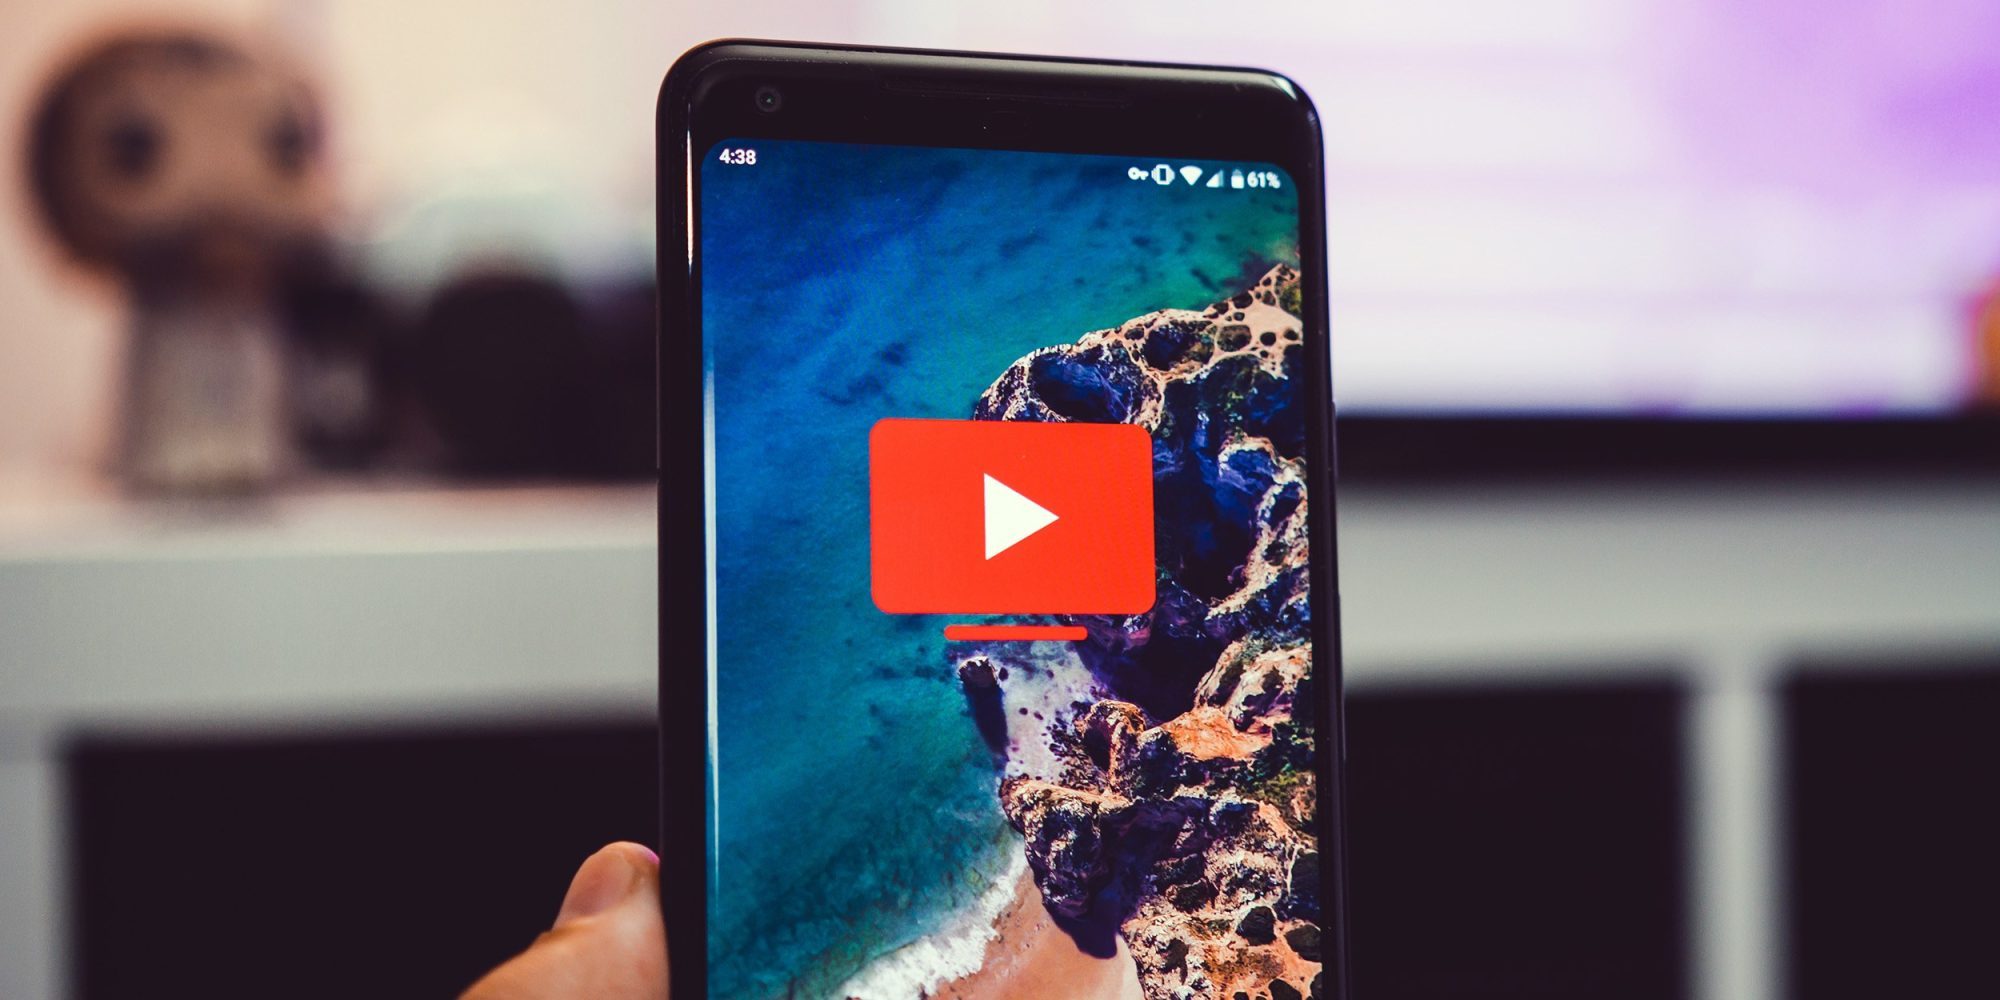 Youtube Tv Is Now Yttv For Android And The Google Tv Icon Has Been Tweaked